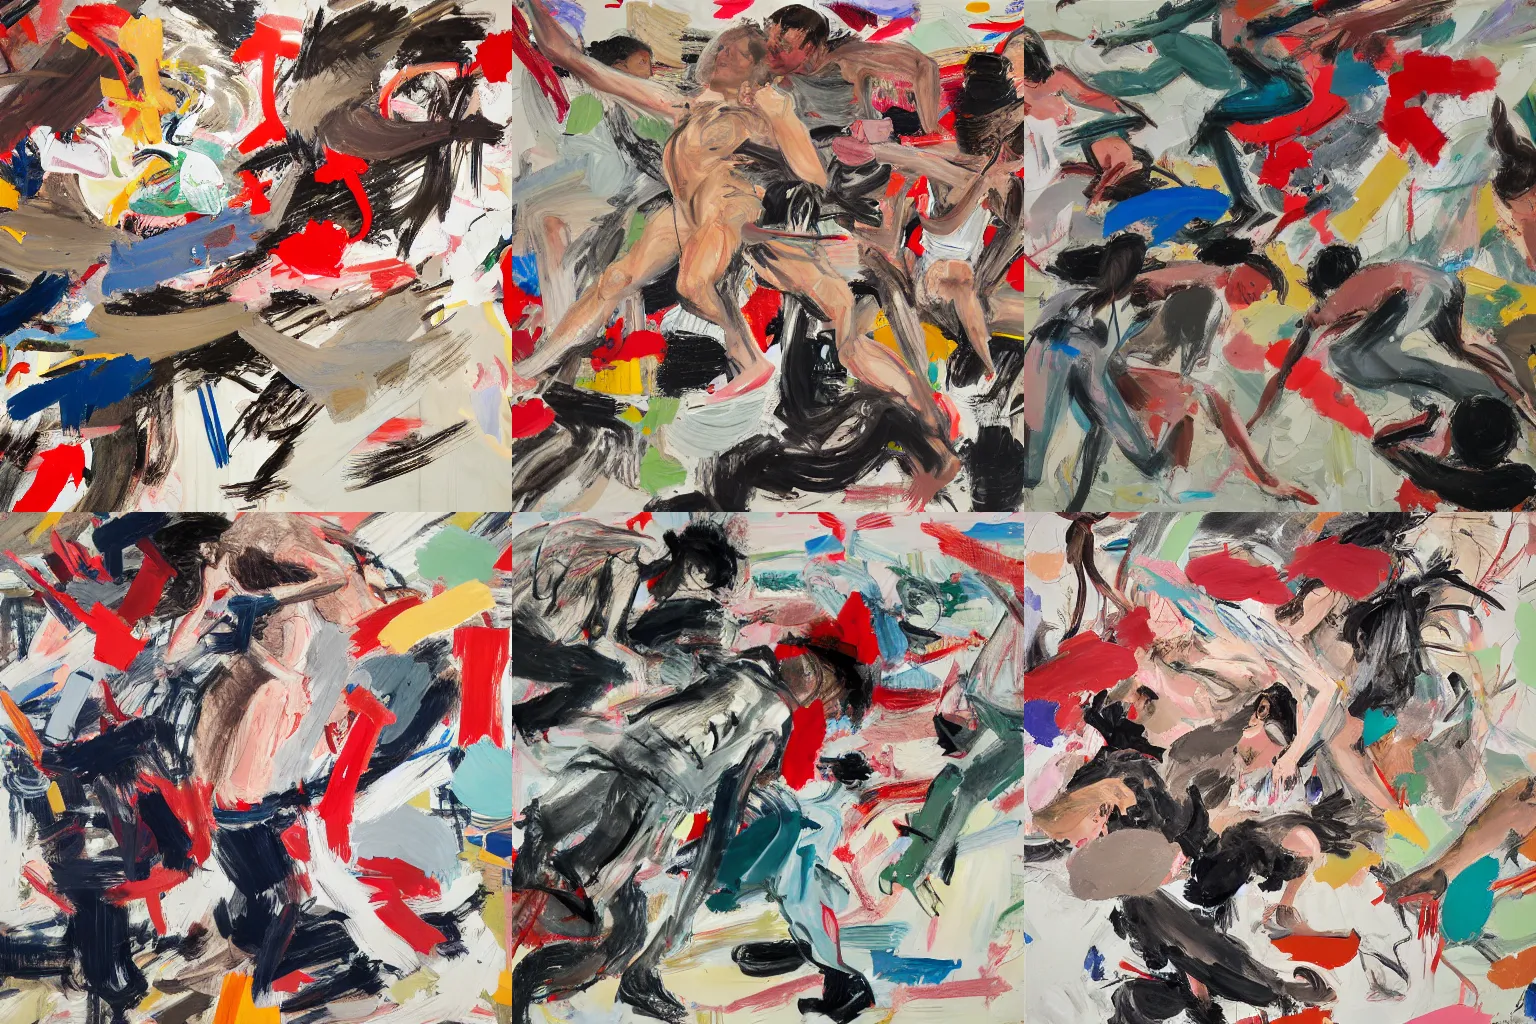 Prompt: artwork by Cecily Brown